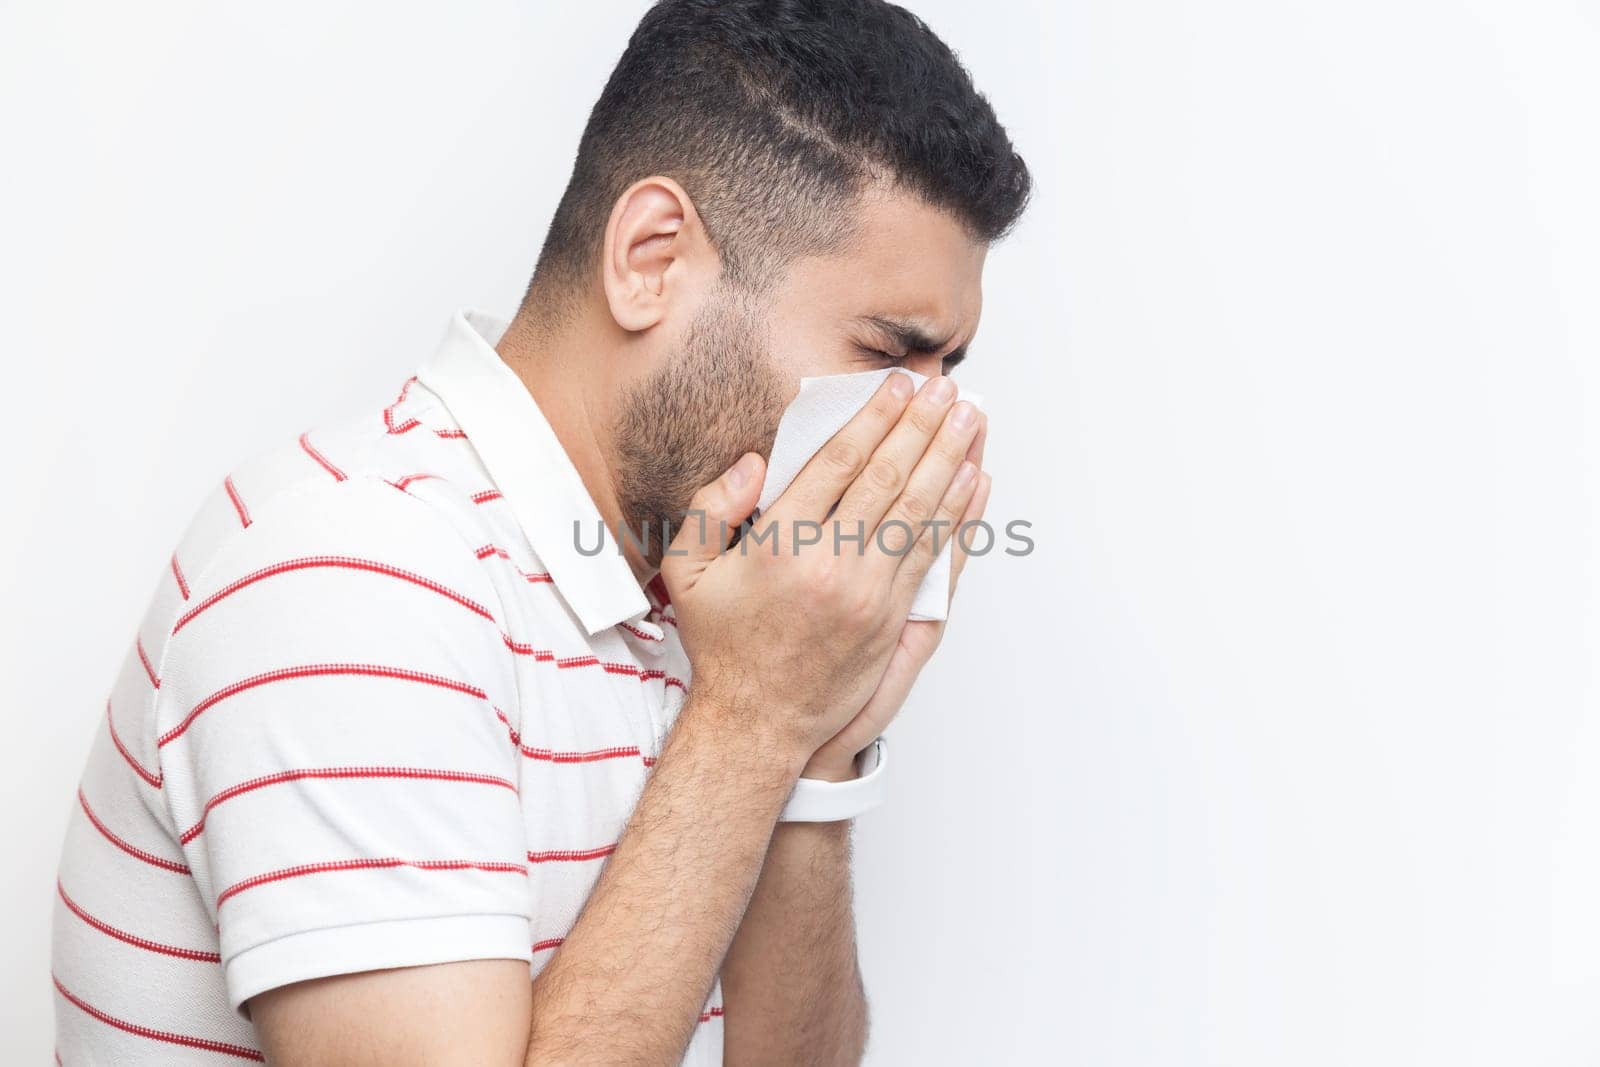 Side portrait of sick unhealthy bearded man wearing striped t-shirt standing having runny nose, using napkin, having flu symptoms. Indoor studio shot isolated on gray background.